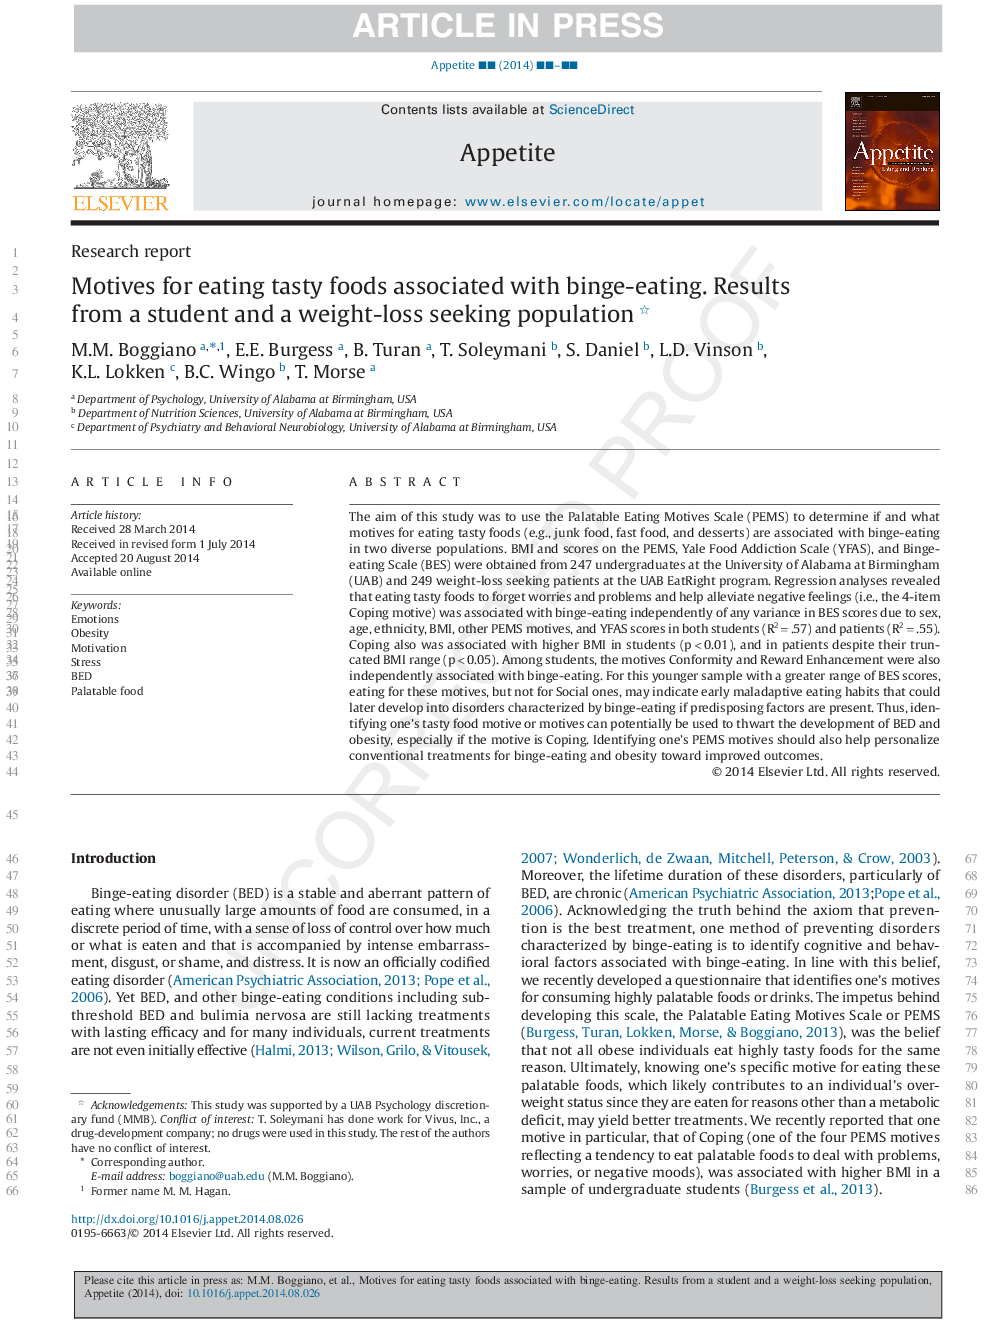 Motives for eating tasty foods associated with binge-eating. Results from a student and a weight-loss seeking population